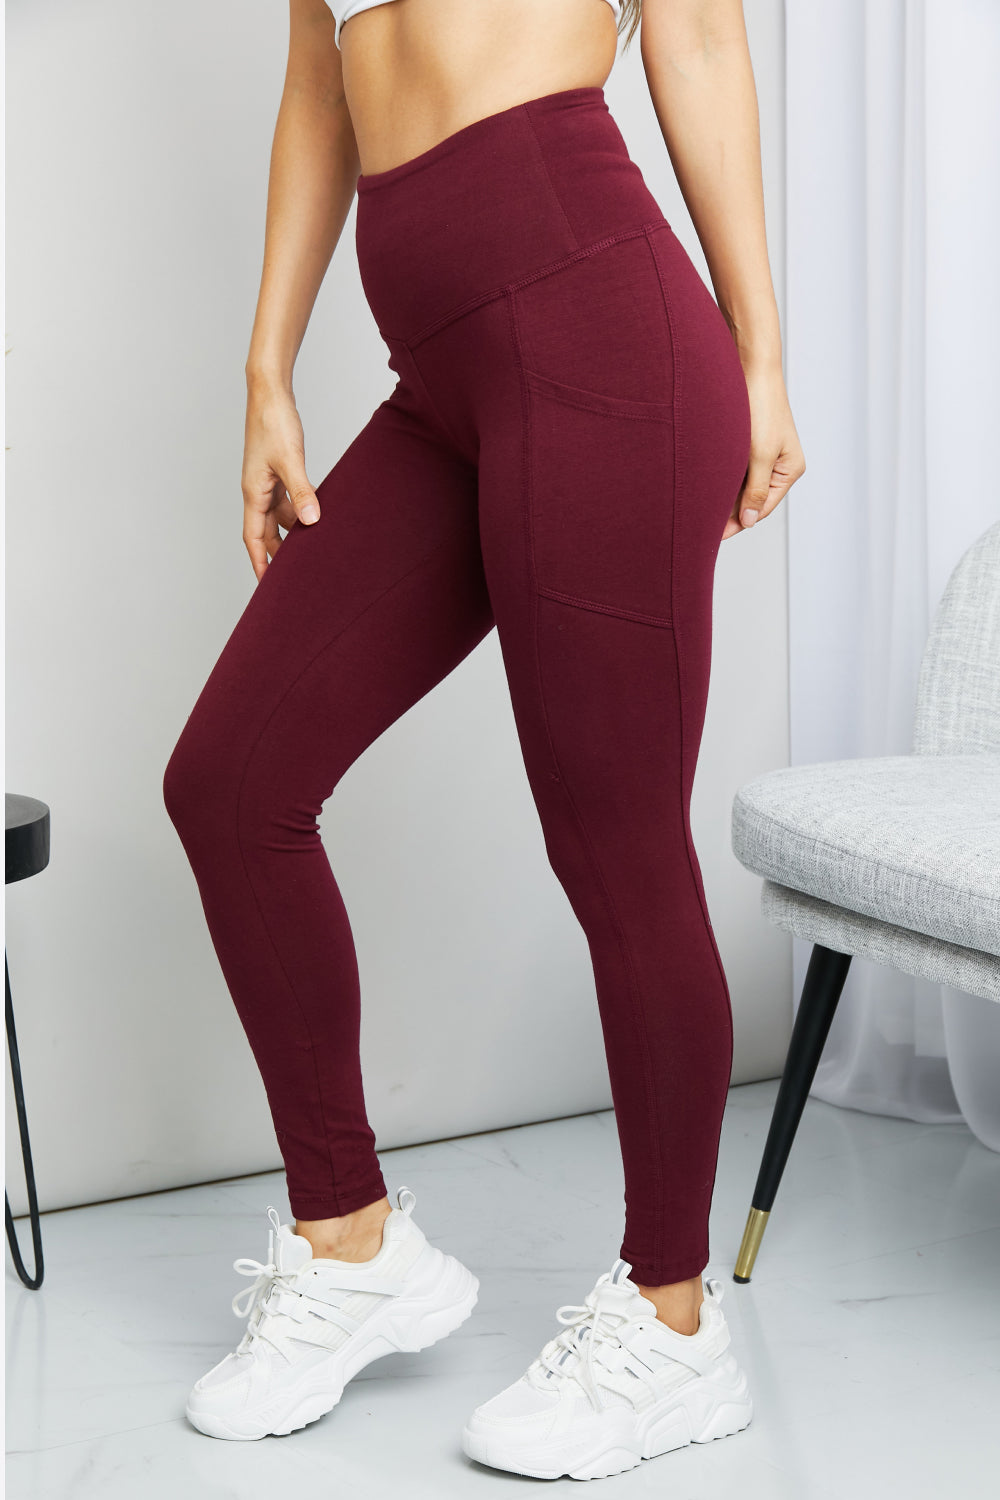 Ready to Roll Wide Waistband Pocket Leggings in Burgundy - Boutique - Bit of Swank